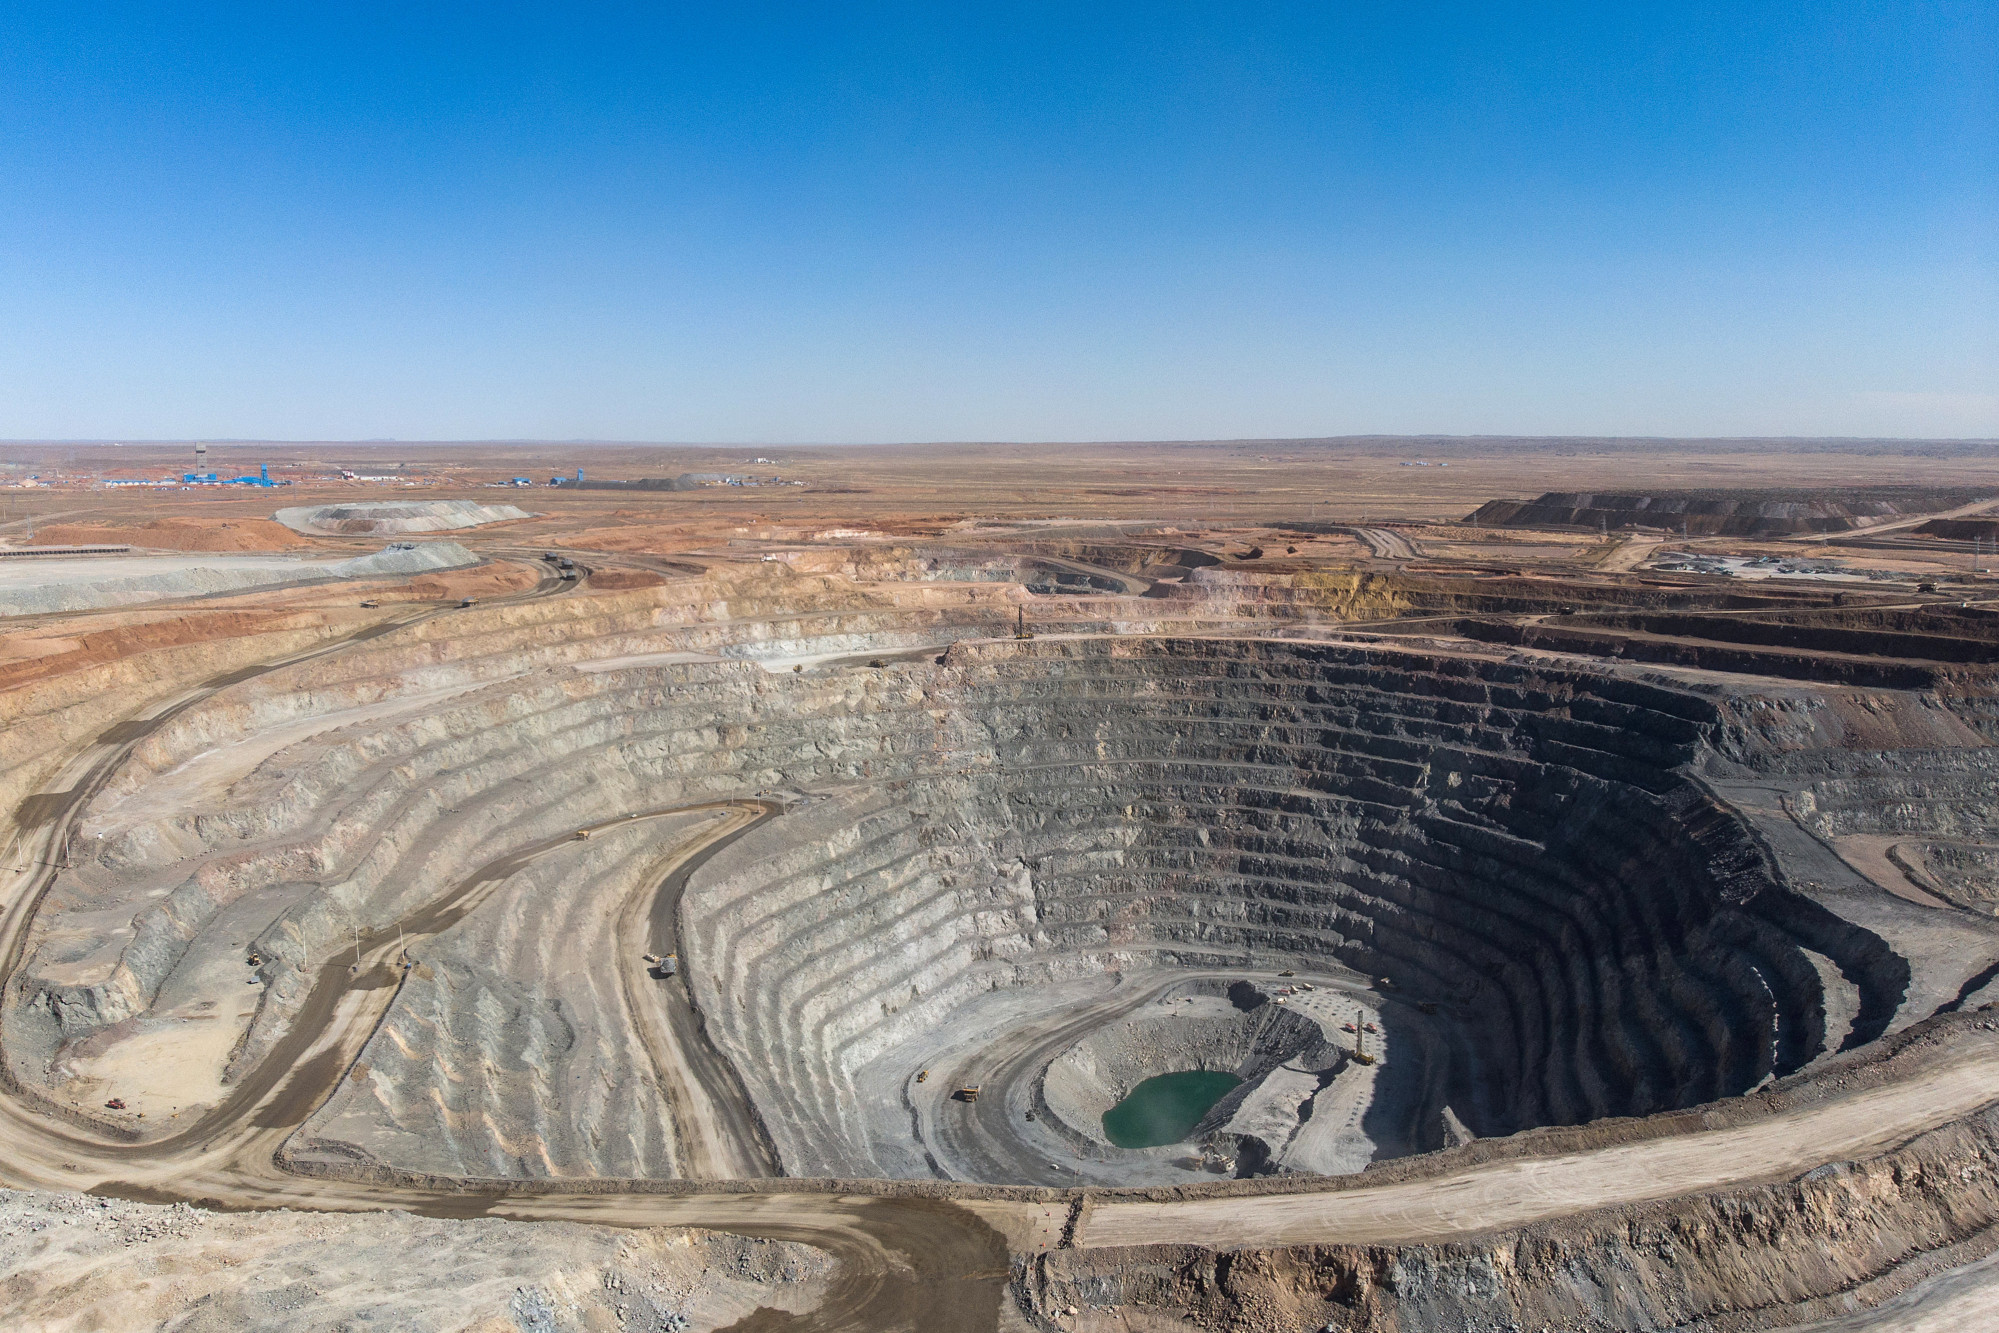 An open pit is seen at the Oyu Tolgoi copper-gold mine in the South Gobi desert of Mongolia